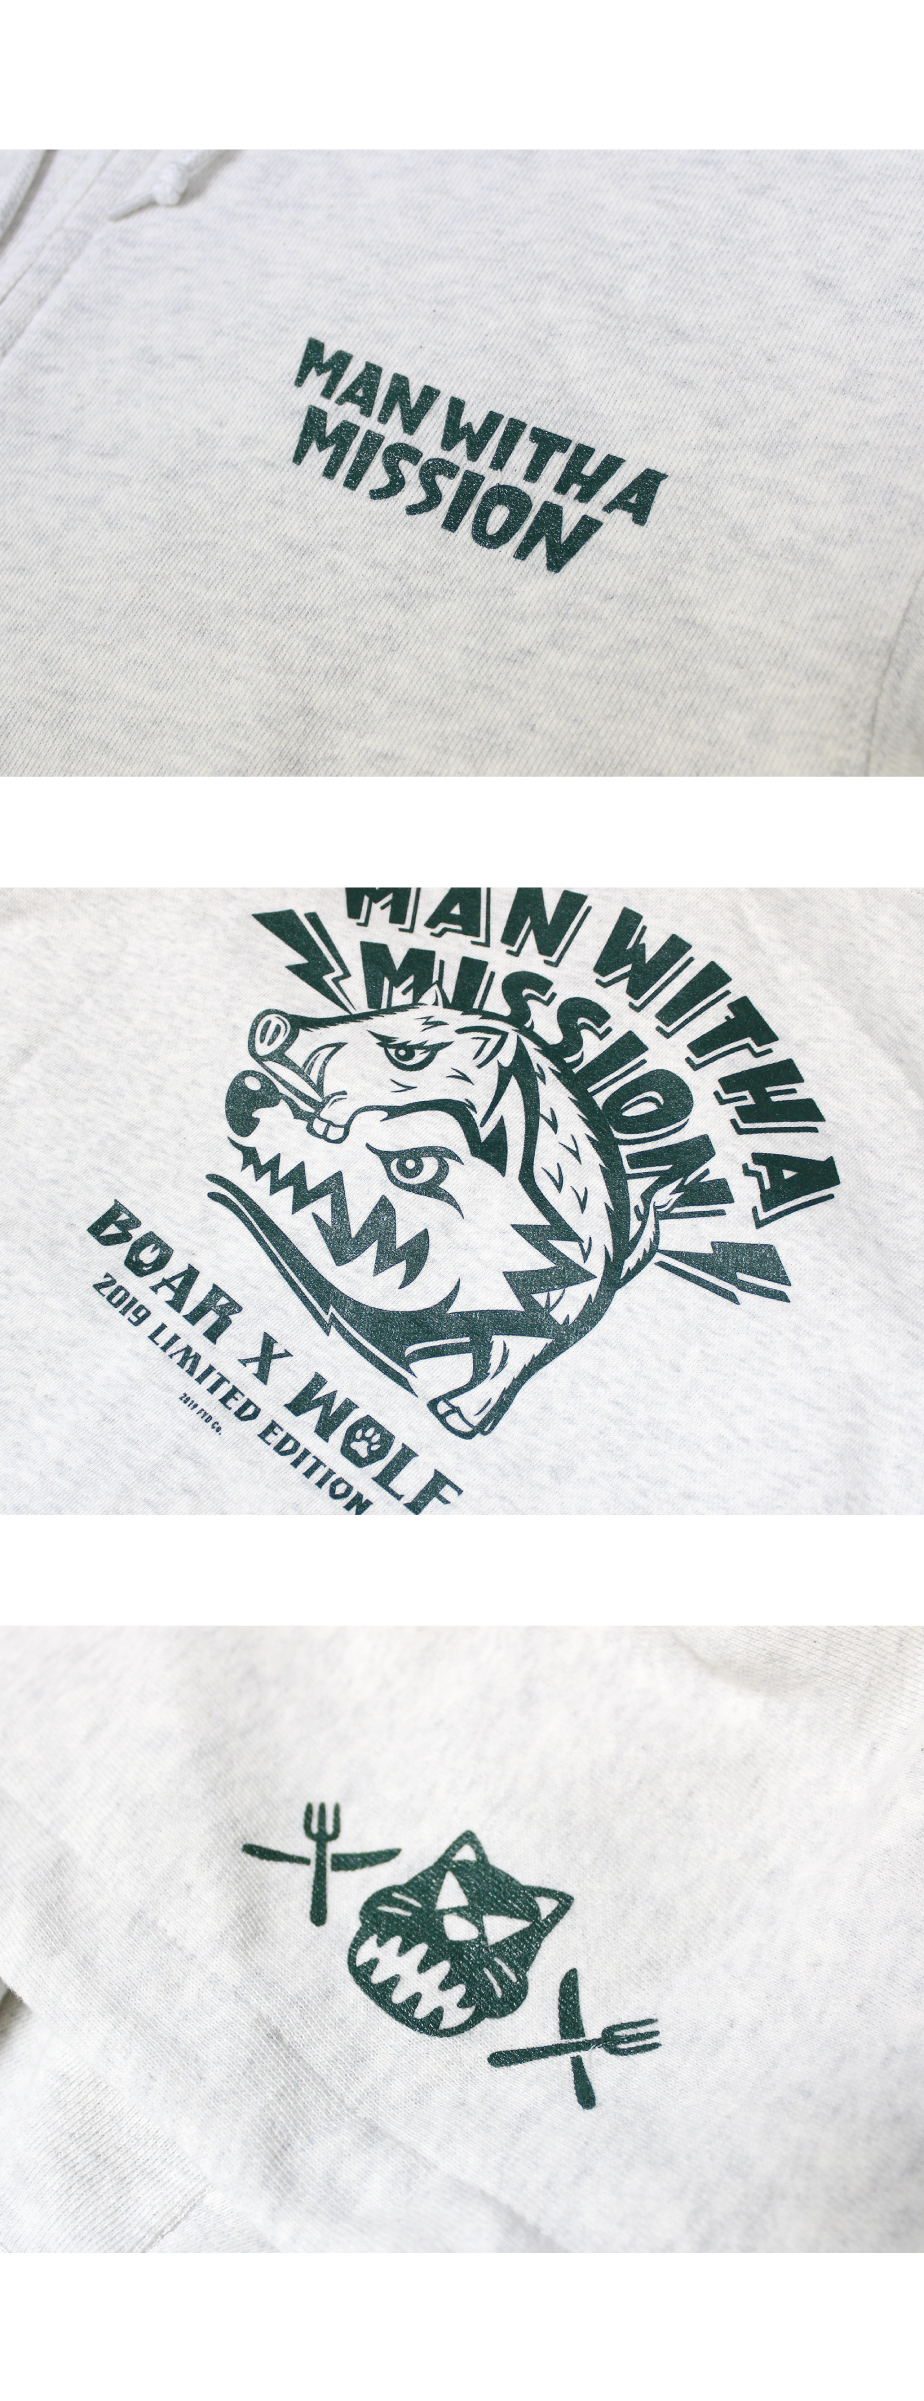 Man With A Mission Goodslookbook